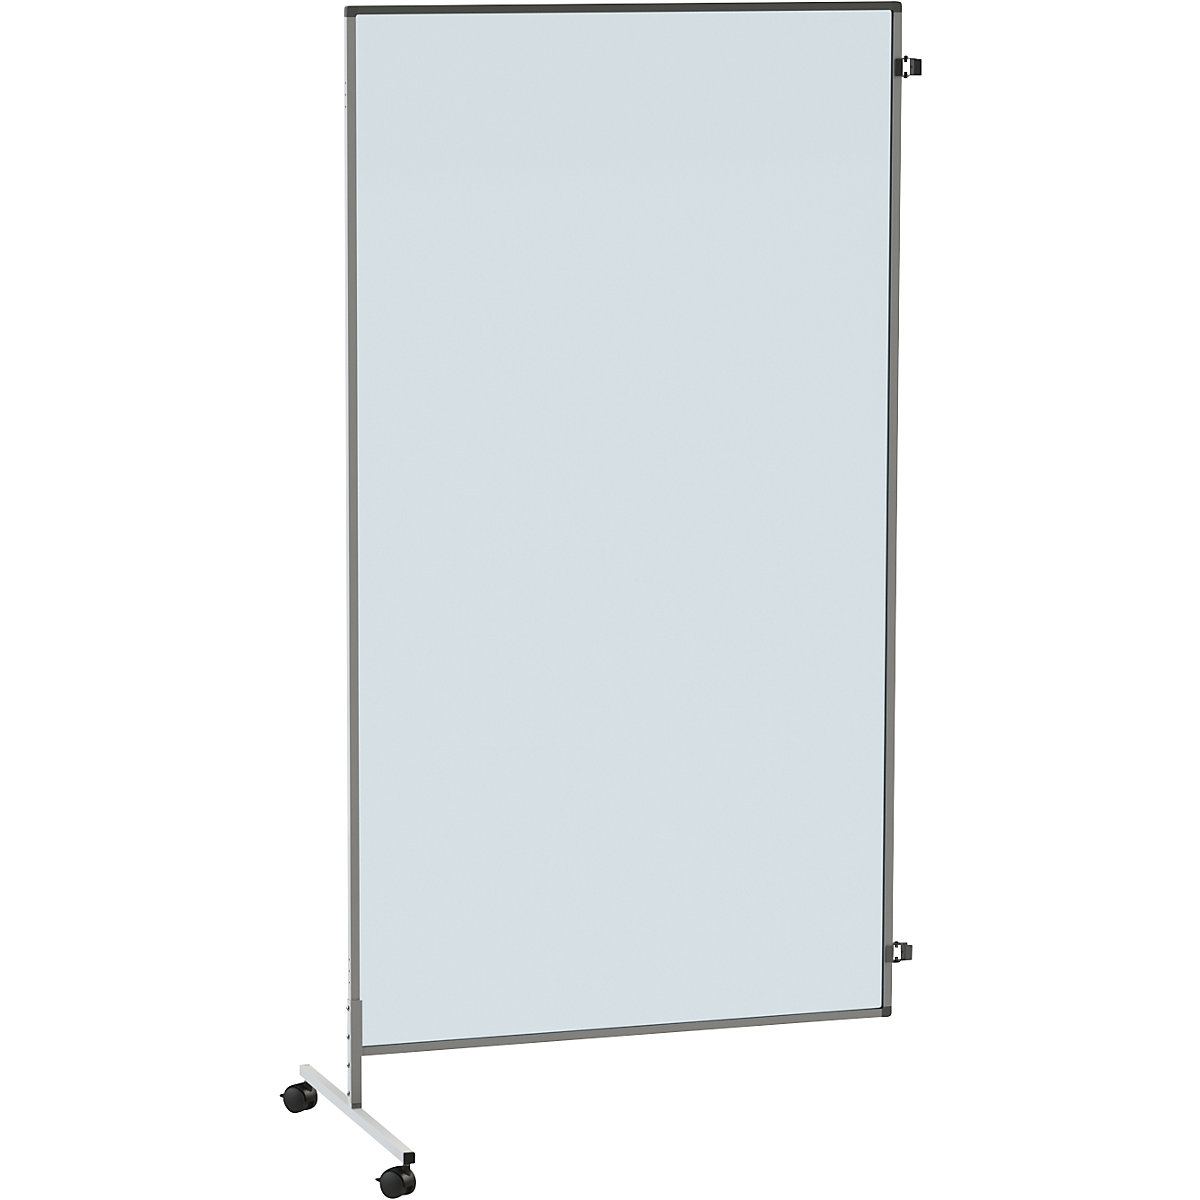 Room divider, transparent and mobile, HxWxD 1950 x 1000 x 650 mm, extension element, acrylic glass